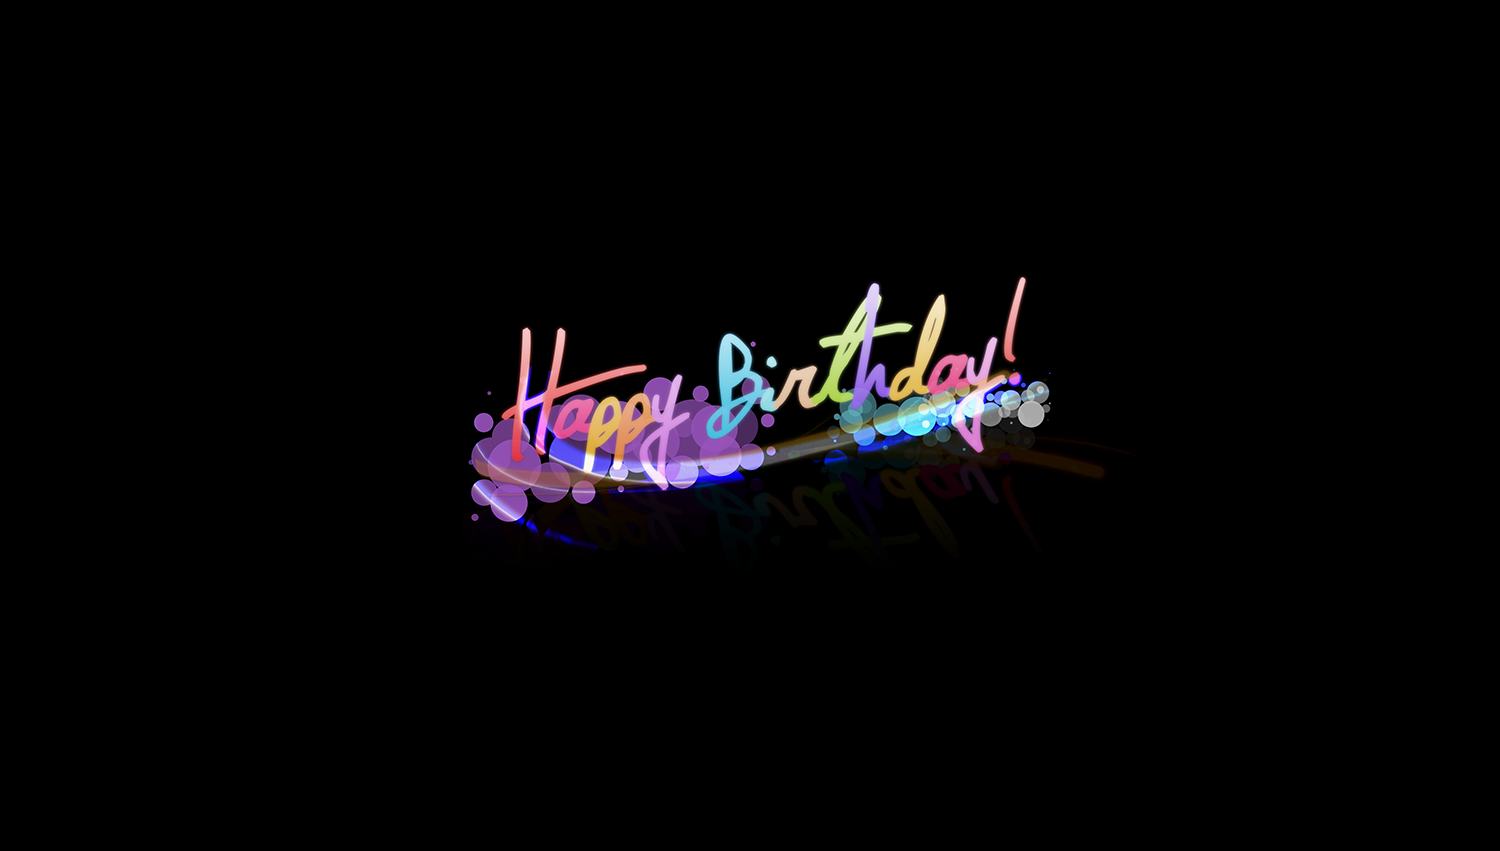 Wallpapers For Happy Birthday